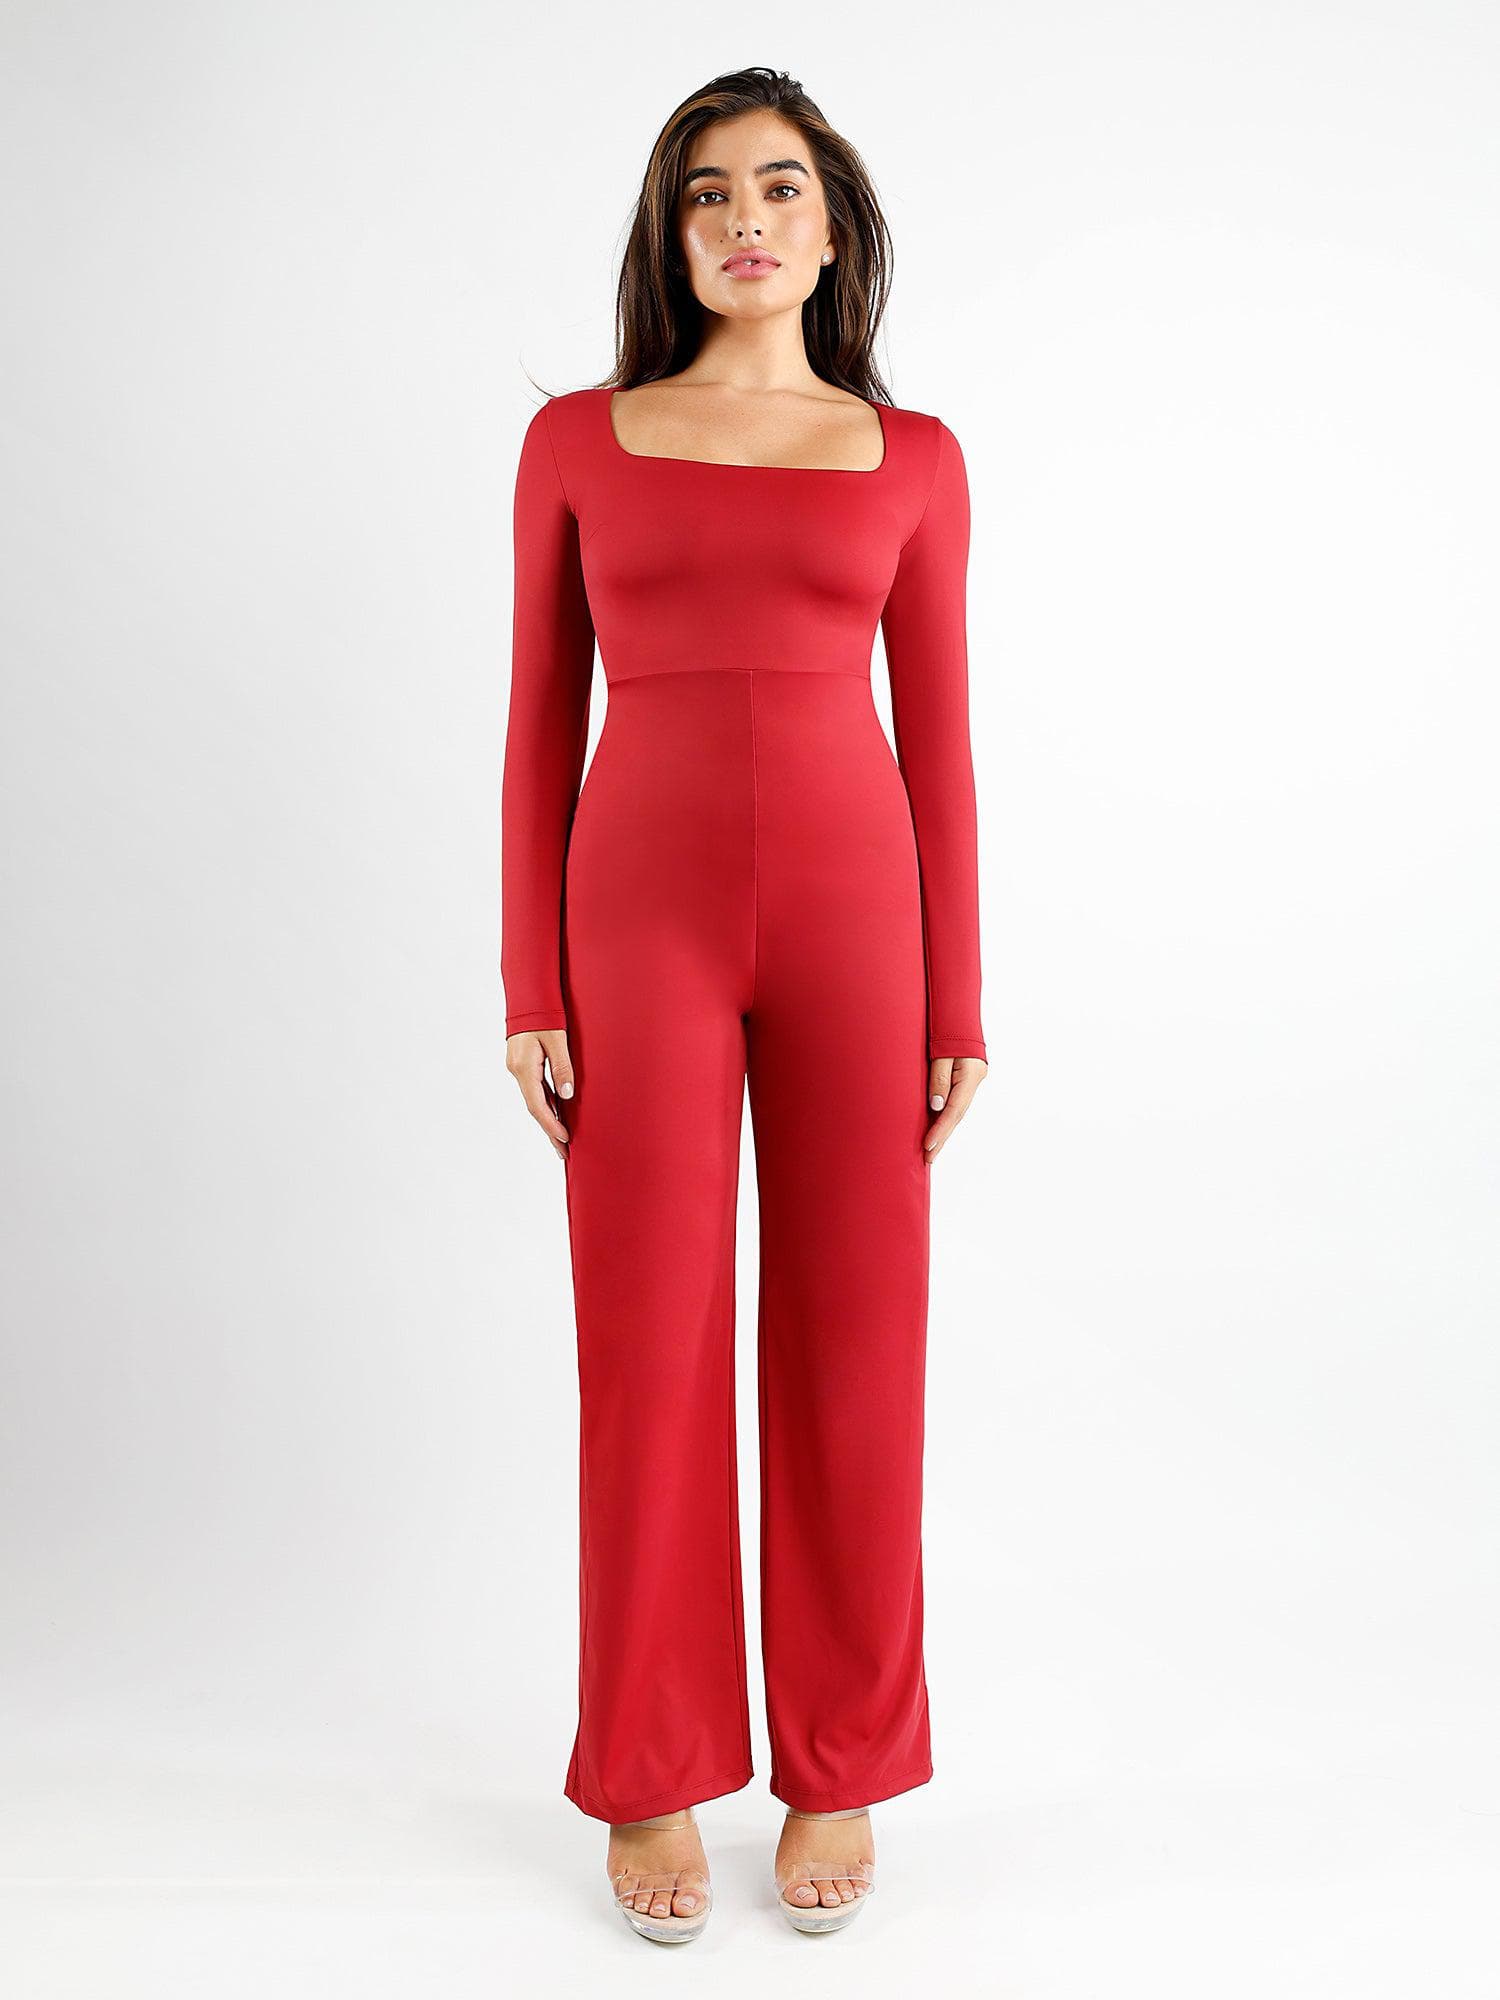 solacol Womens Long Sleeved Solid Color Light Velvet Fashion Square Neck  Tight Fitting Cutout Jumpsuit